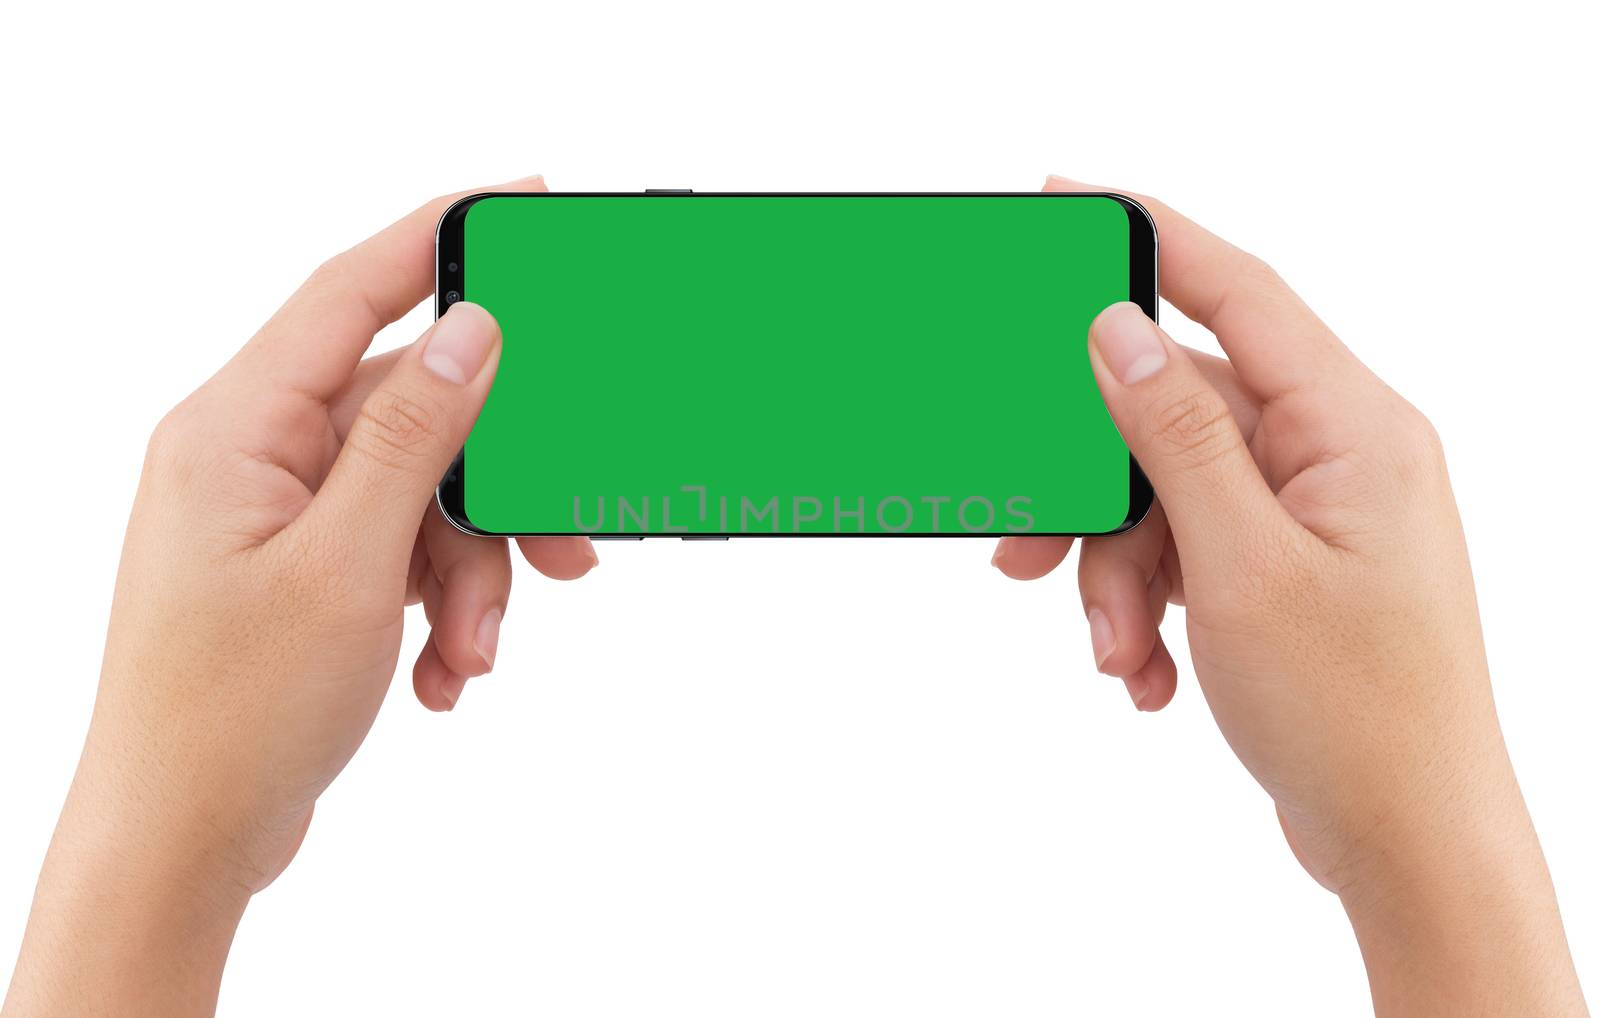 Isolated human two hands holding black mobile green display smar by cougarsan